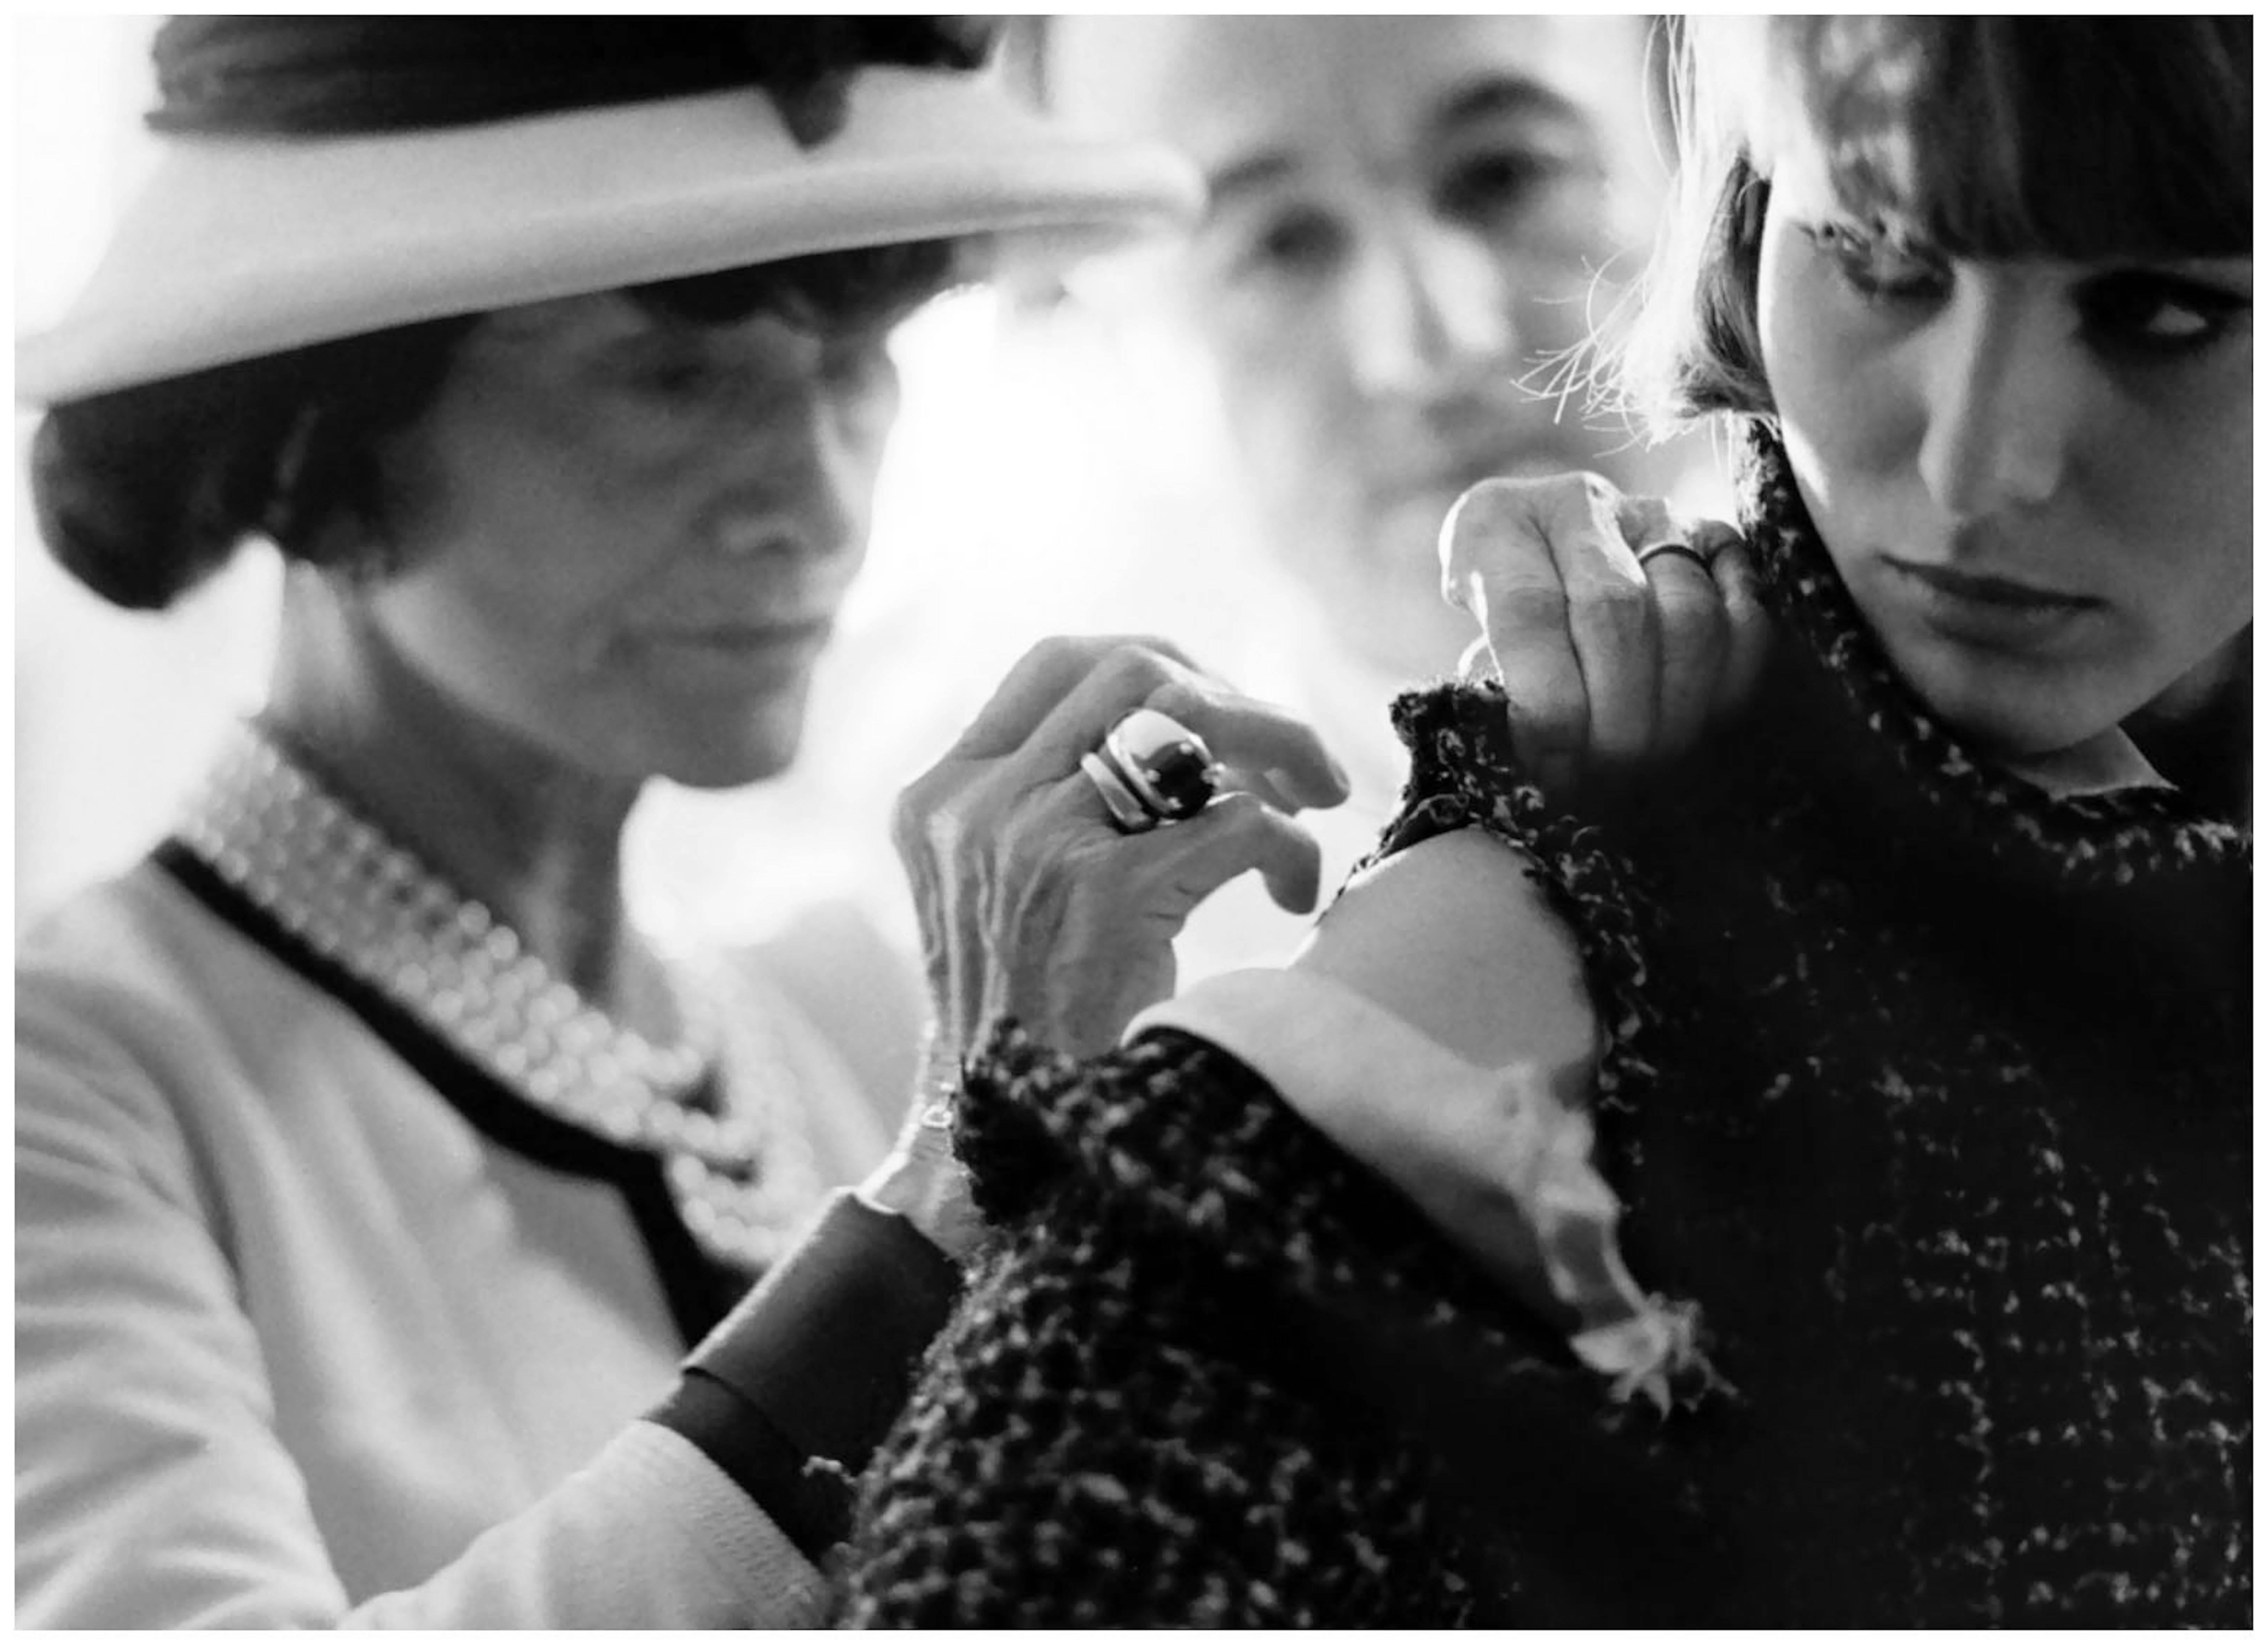 Size: 20" x 24"

Edition Size: 24

Hand signed and numbered by the artist.

Will be shipped unframed. Please inquire for framing options.

Mademoiselle Chanel at work. Douglas Kirkland was sent to Paris on assignment for Look magazine, and ended up